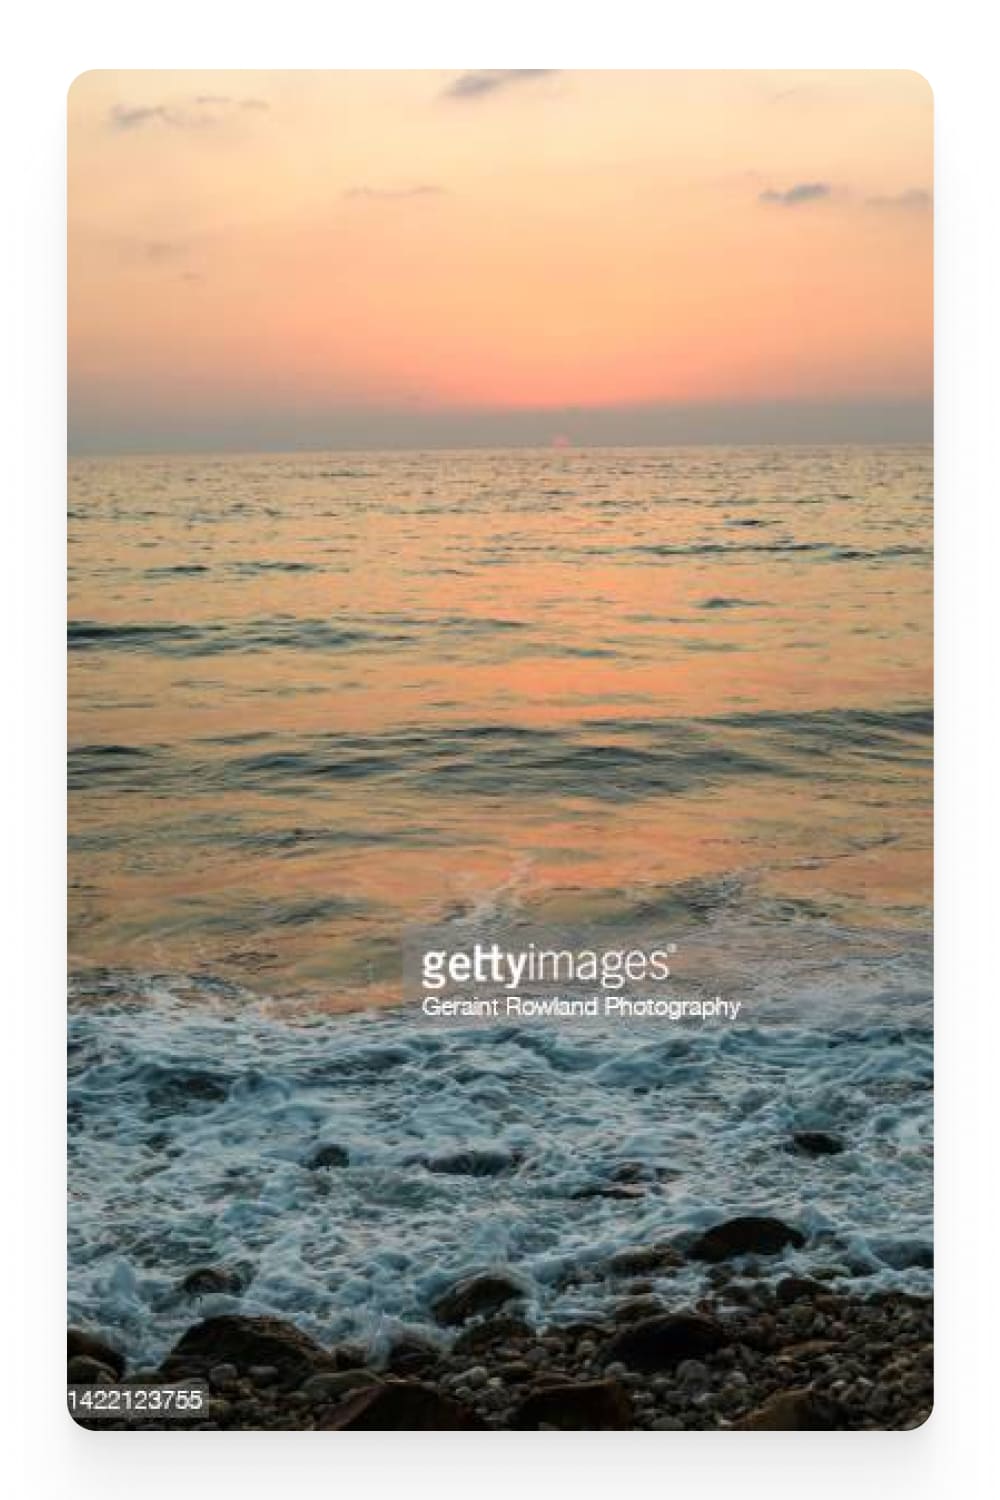 Photograph of the sea at sunset.